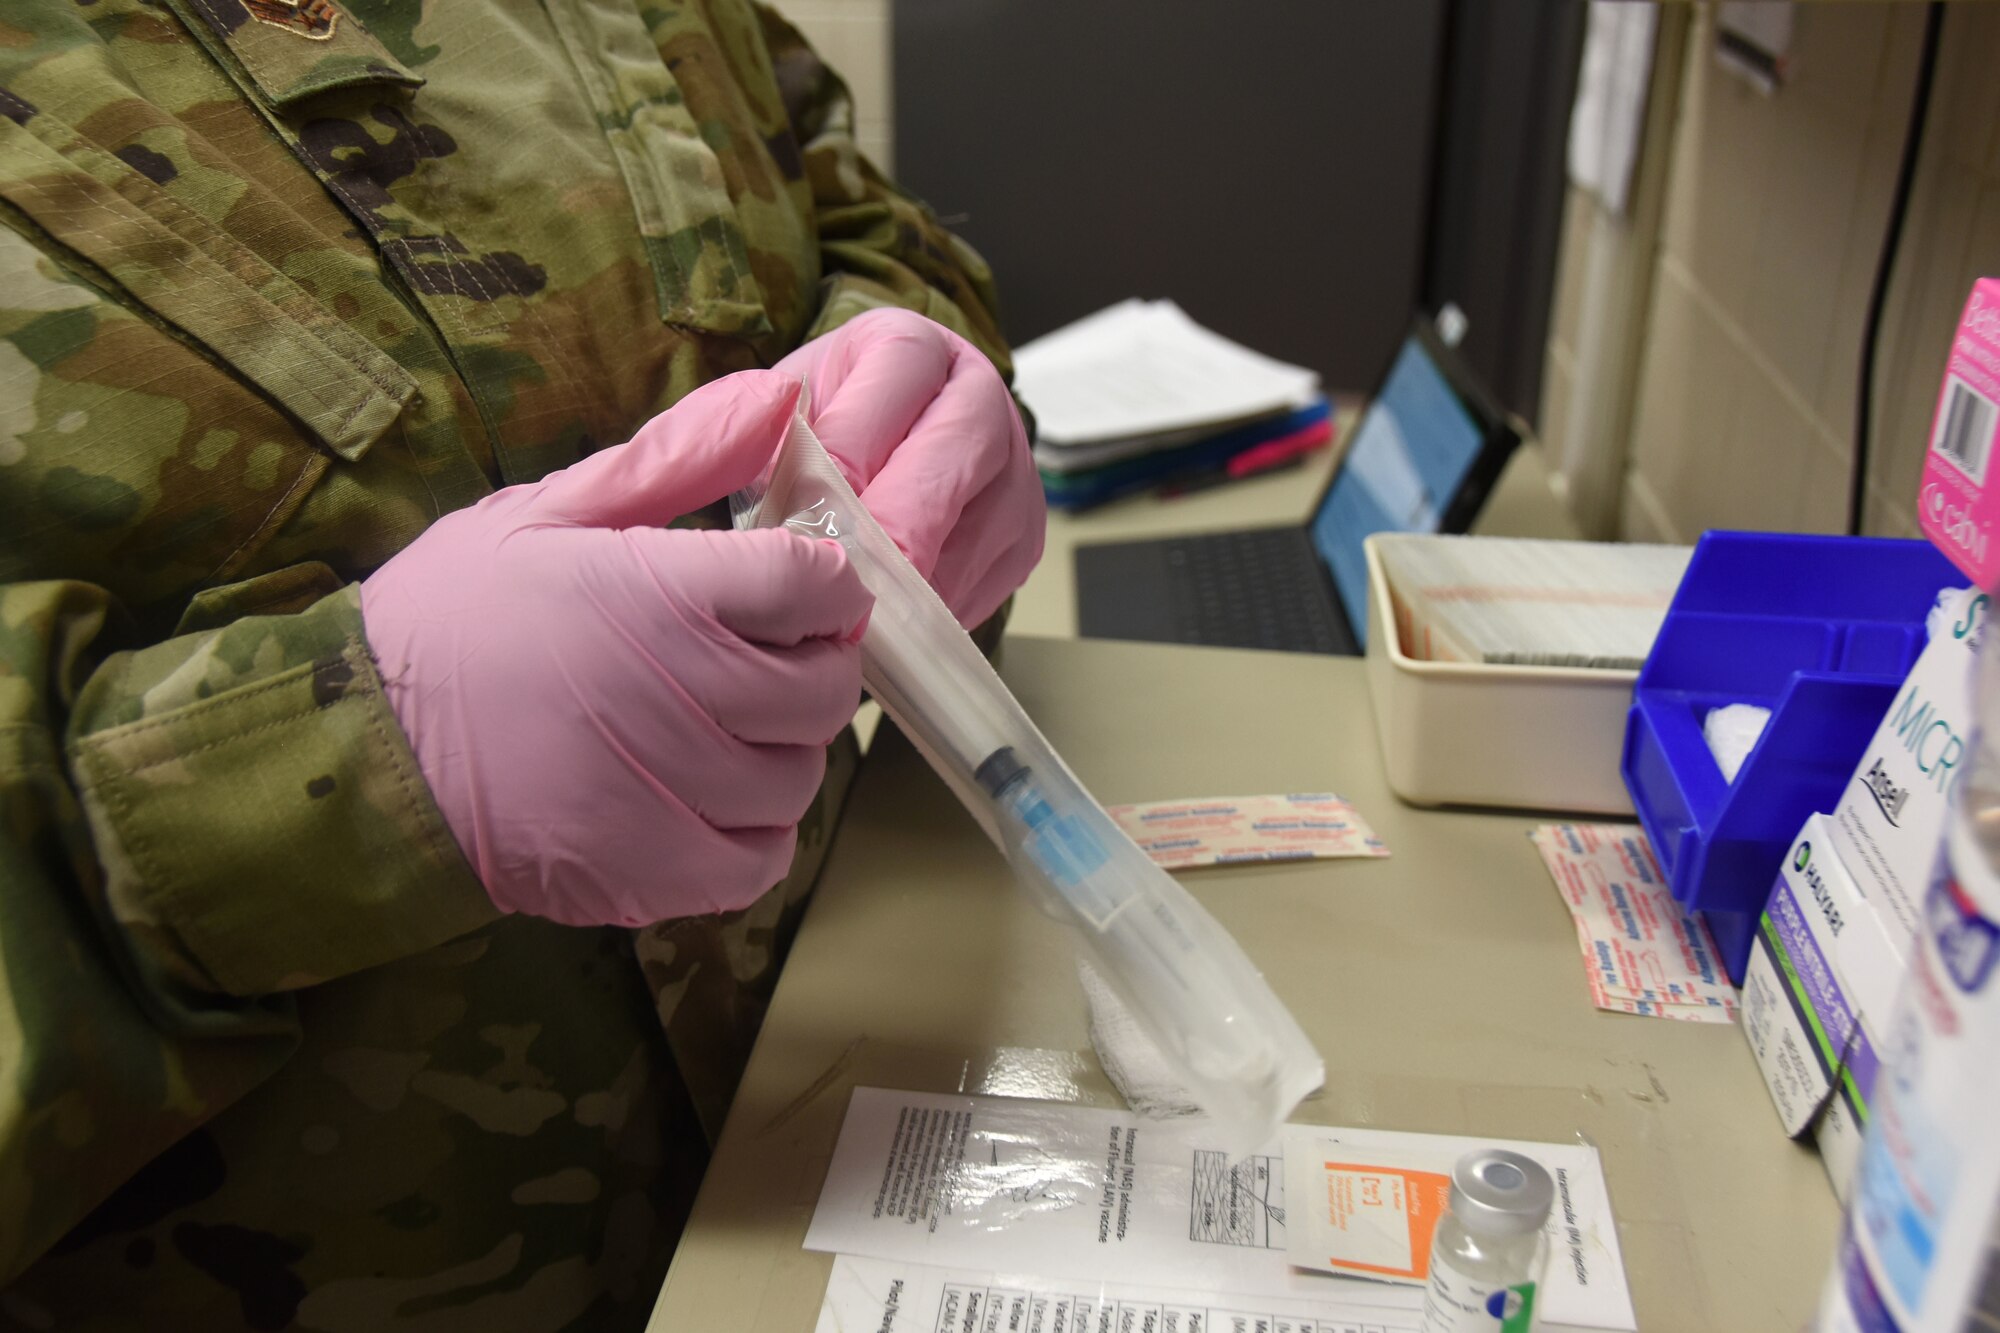 U.S. Air Force Senior Airman Cynthia Ford, 145th Medical Group technician, readies a needle in preparation for giving an immunization at the North Carolina (N.C.) Air National Guard Base, Charlotte Douglas International Airport, Mar. 7, 2020. Senior Airman Ford works as a traditional Guardsman but also serves, in her civilian life, as a Manager for the Department of Juvenile Justice in Marion, S.C. Senior Airman Ford has authored a book titled, ‘Free As An Uncaged Bird,’ which helps acts as a positive and motivational journal, empowering youth and adults. Senior Airman Ford was recently nominated by WBTW News 13 in her local area as Woman of the Year for one of their segments; she has won for her area and will fly to New York mid-March to compete for Woman of the Year Nationally.